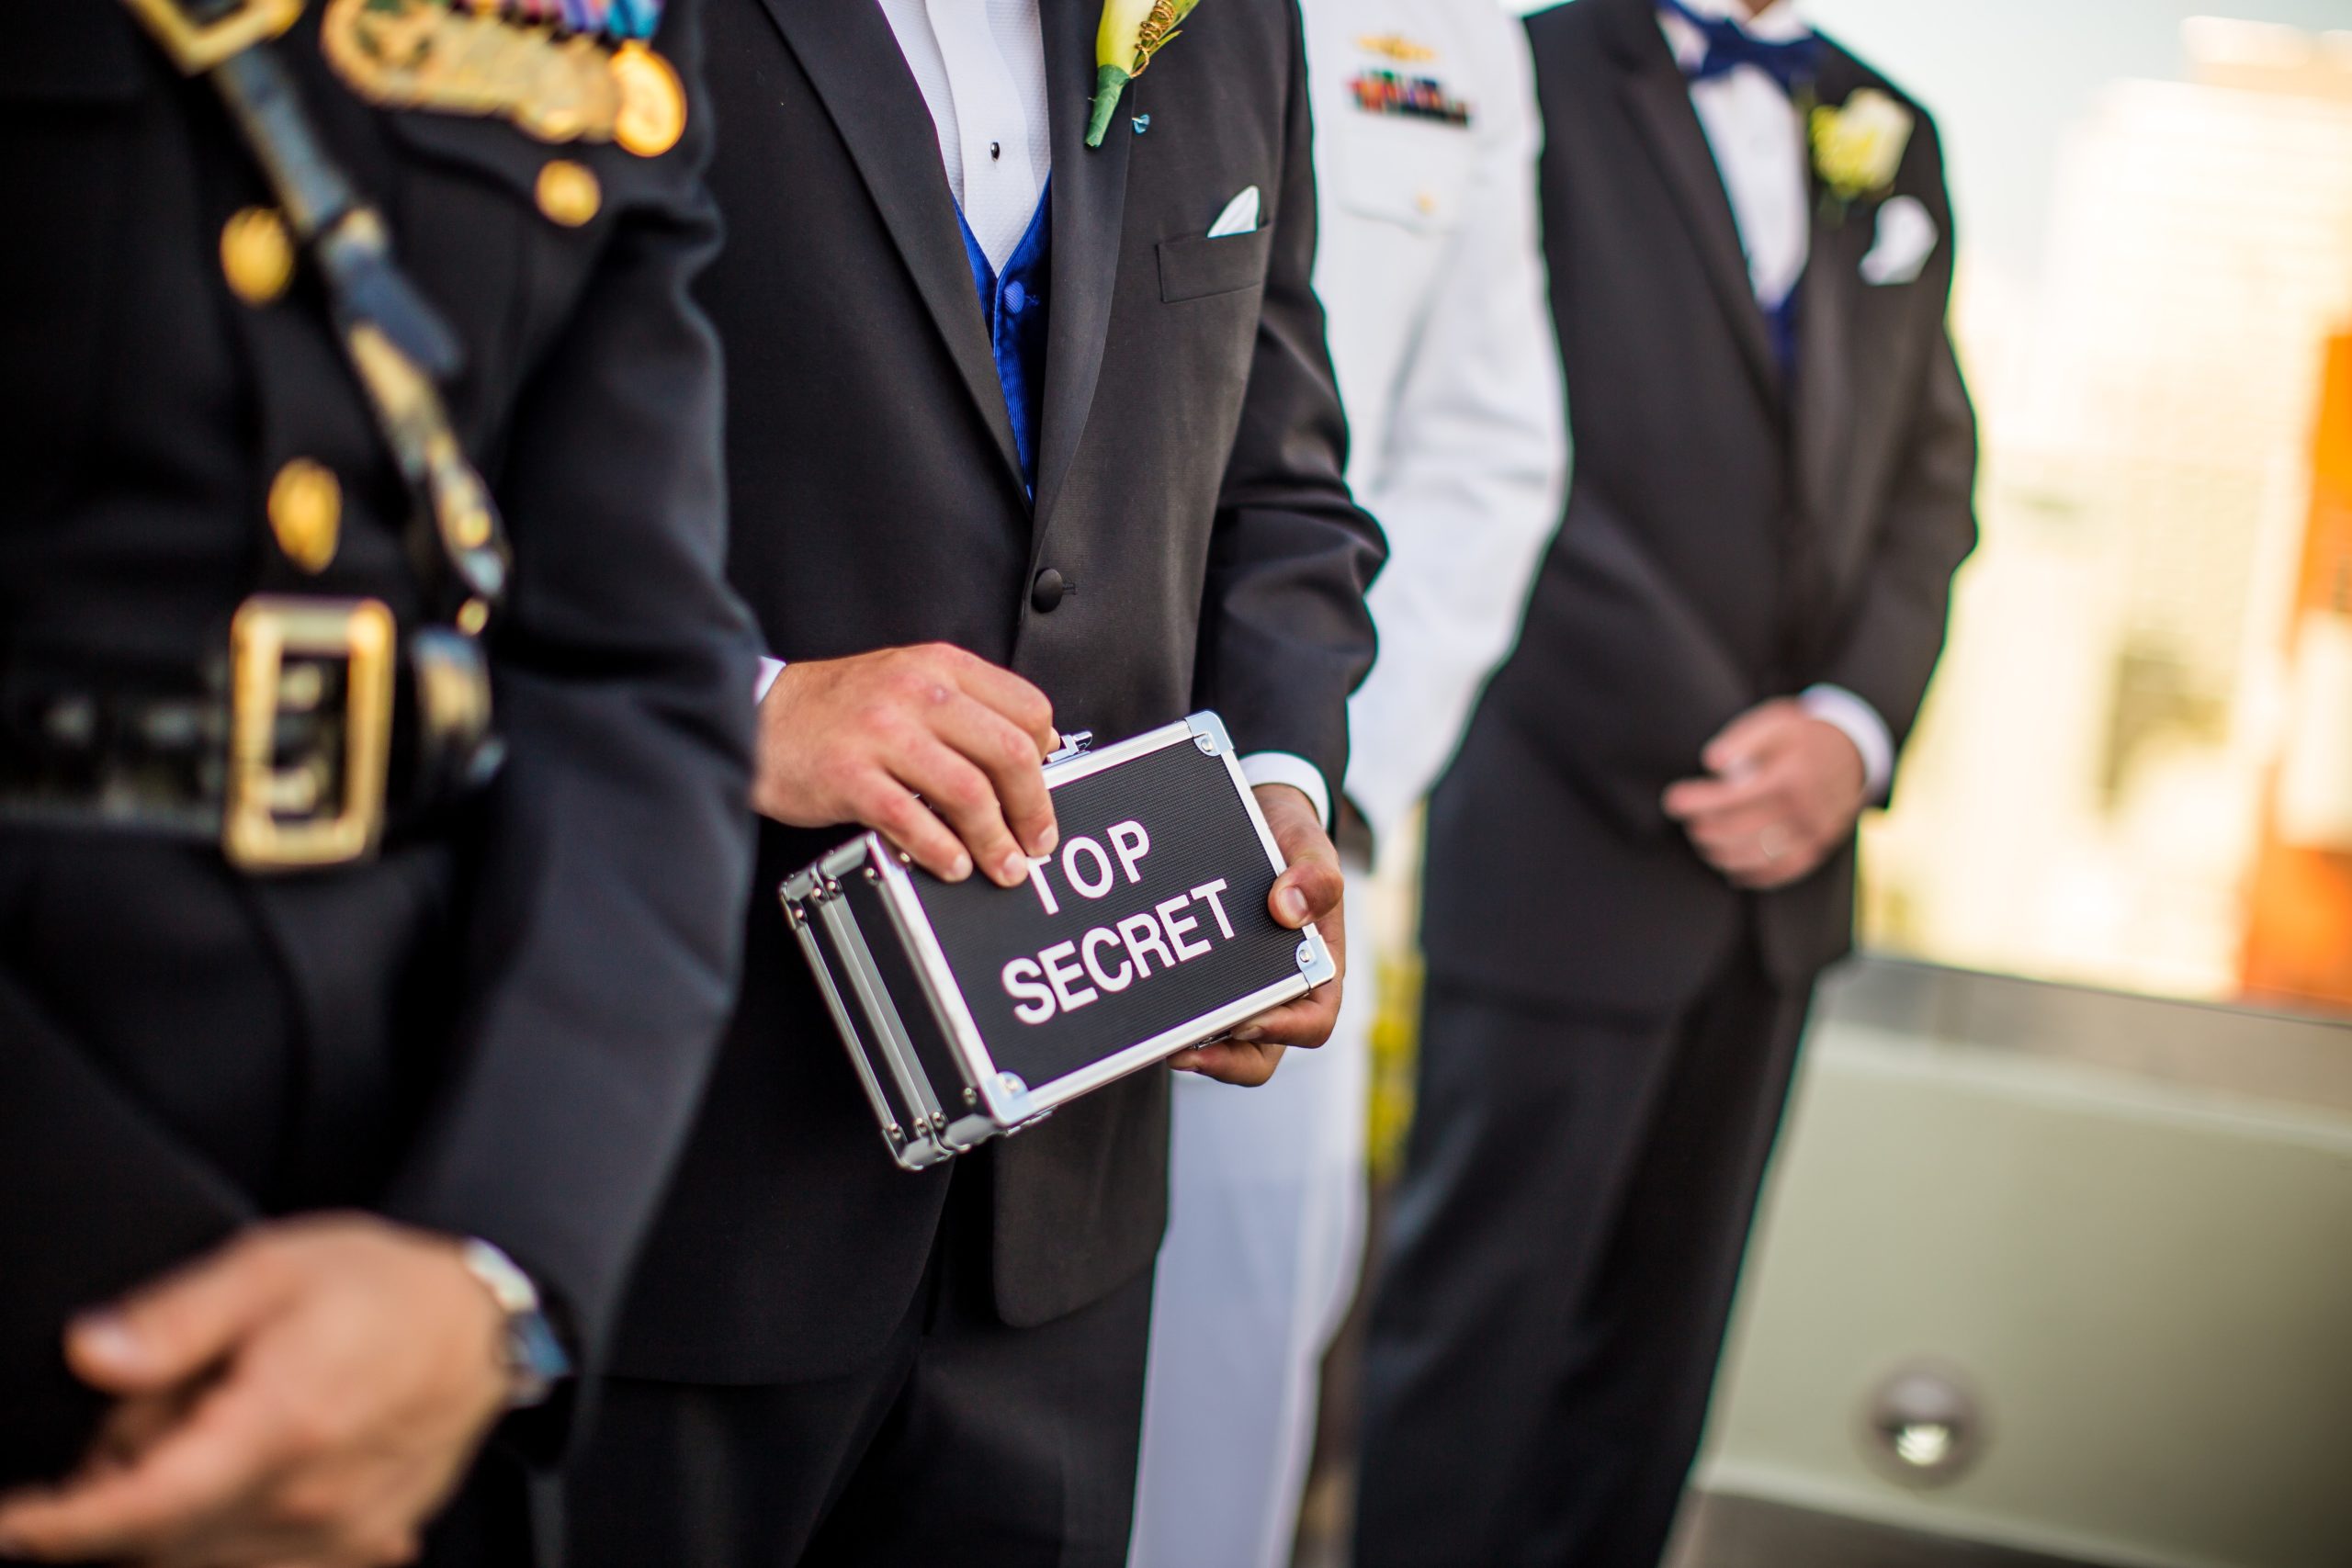 Several uniformed men standing next to each other. Faces are not seen. One holds a small case with the words "Top Secret" on the side.